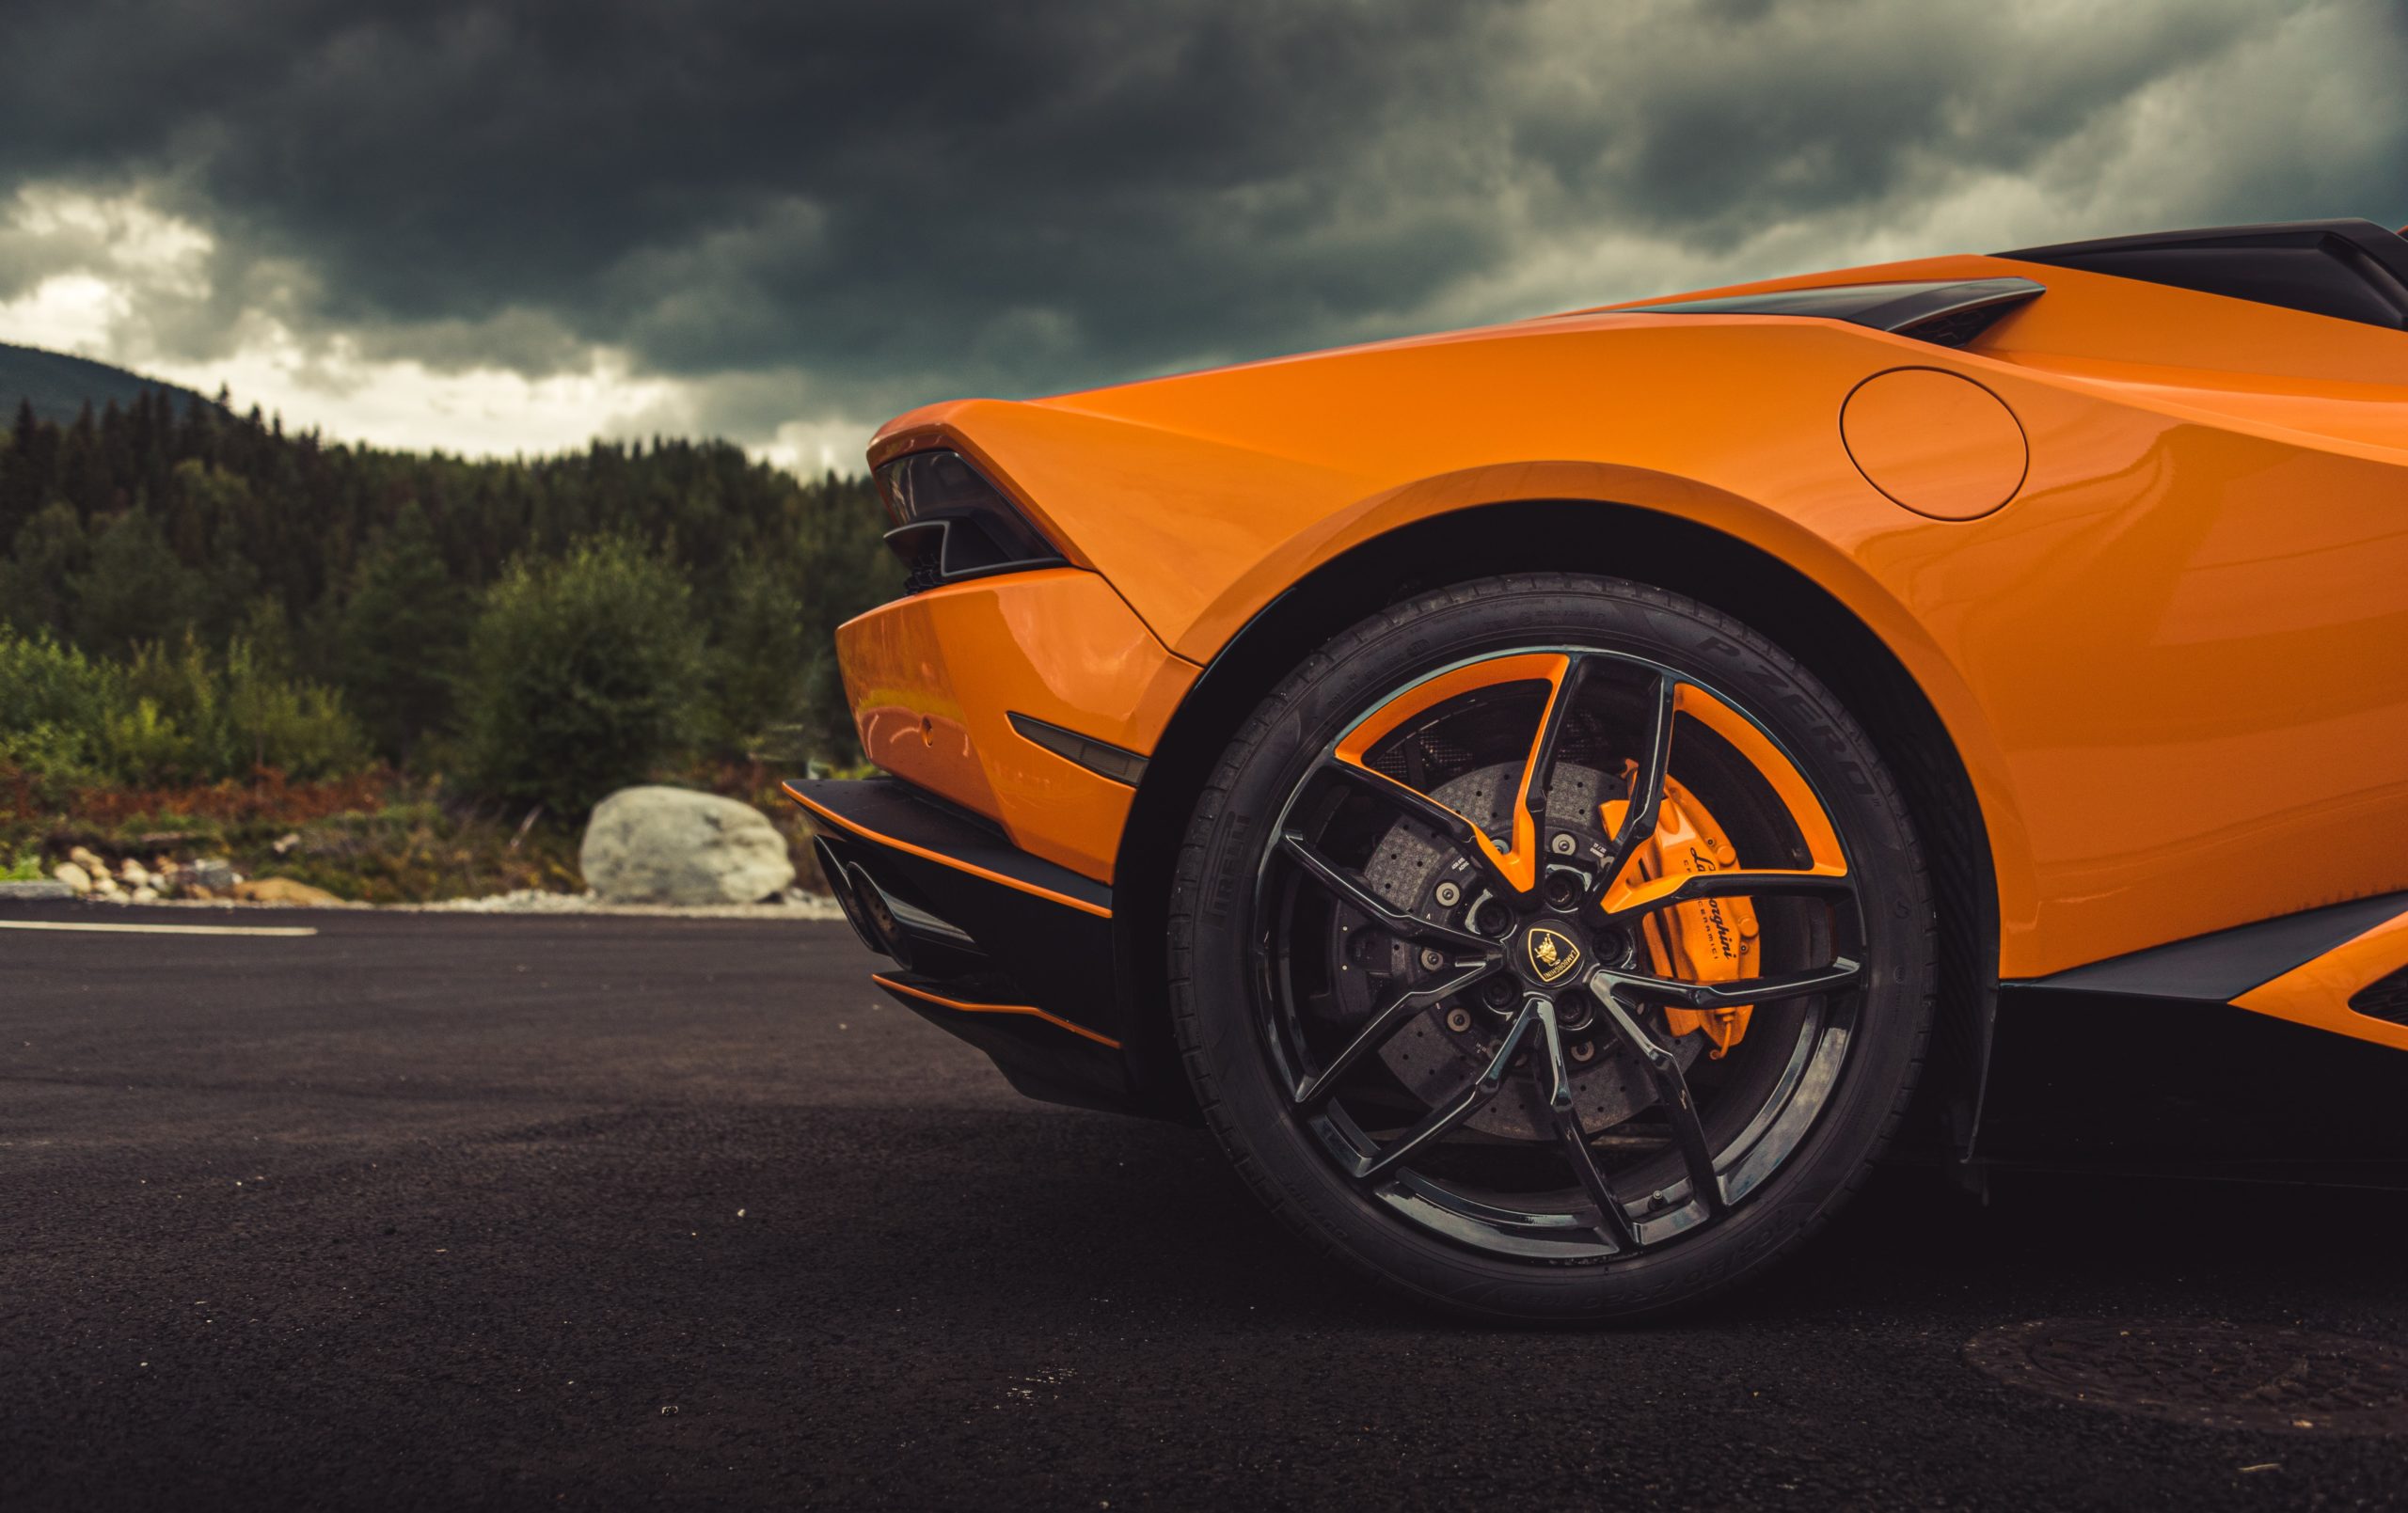 Read on this guide to learn everything you need to know about changing car rims